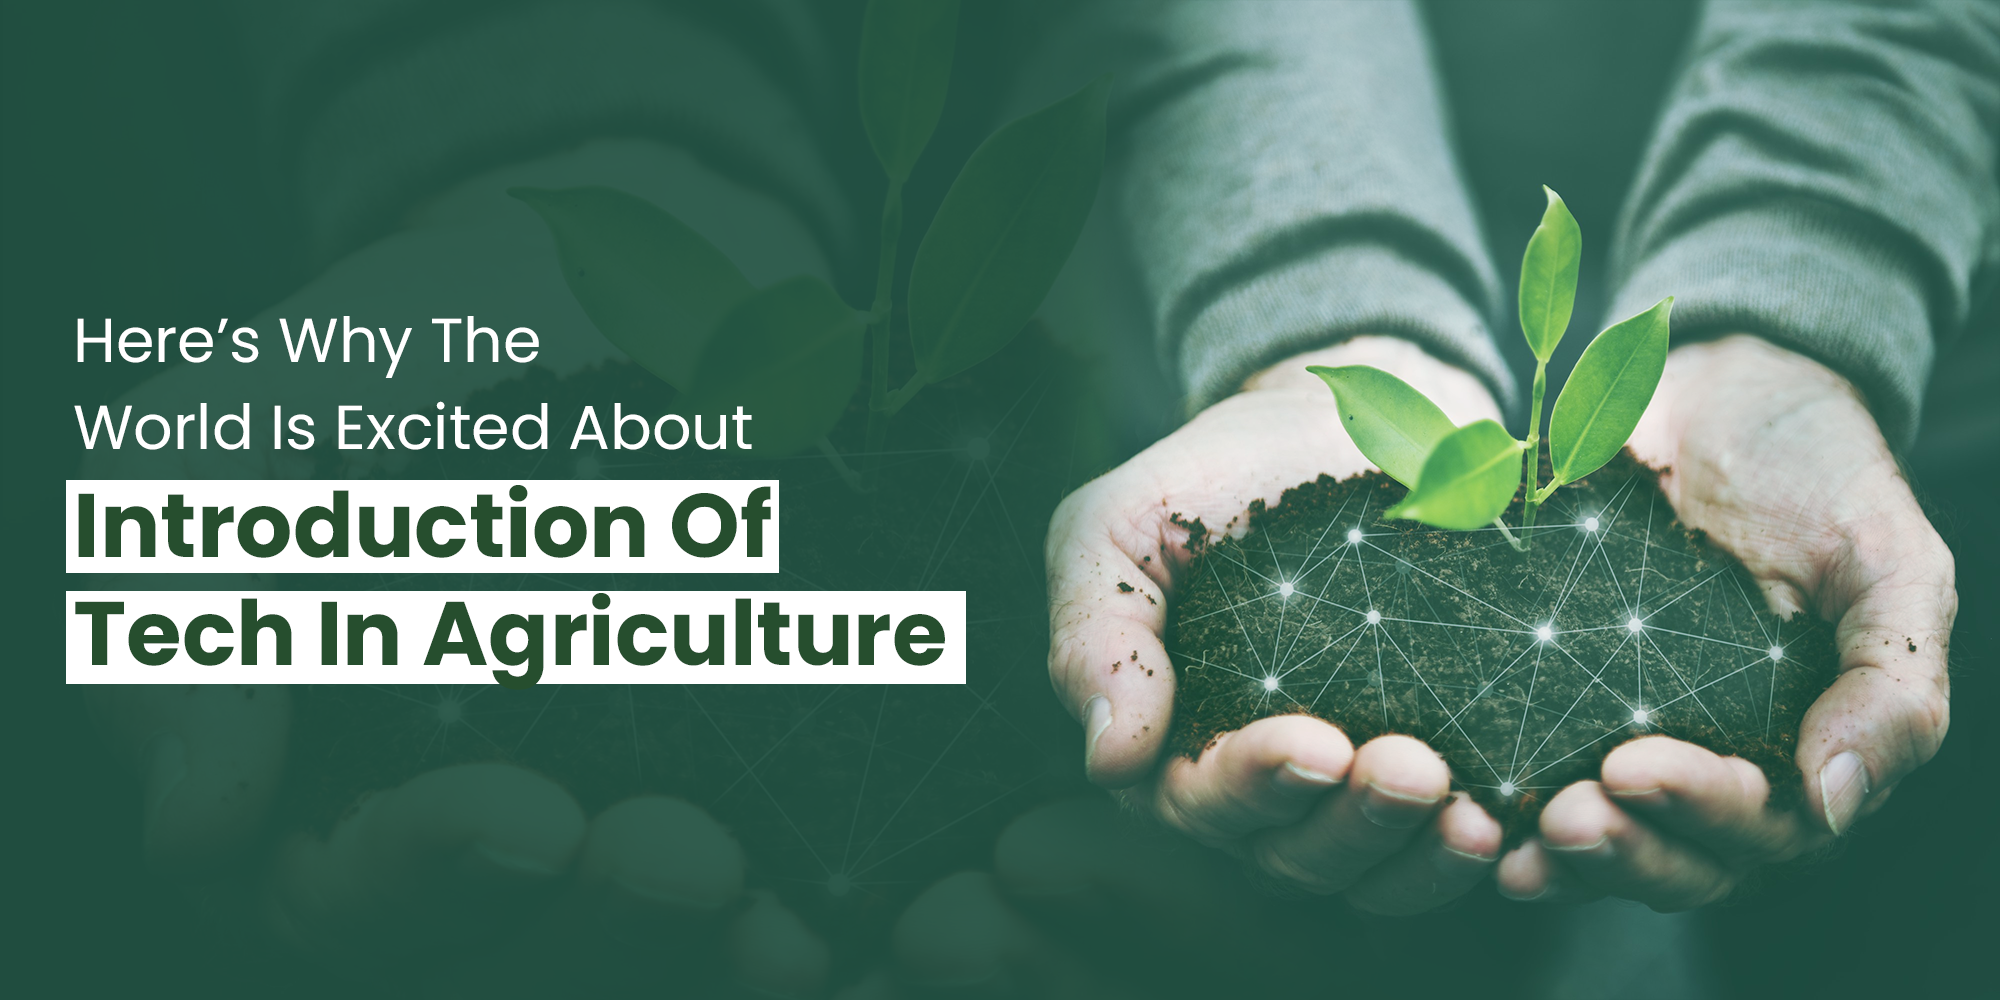 Here’s Why The World Is Excited About Introduction Of Tech In Agriculture